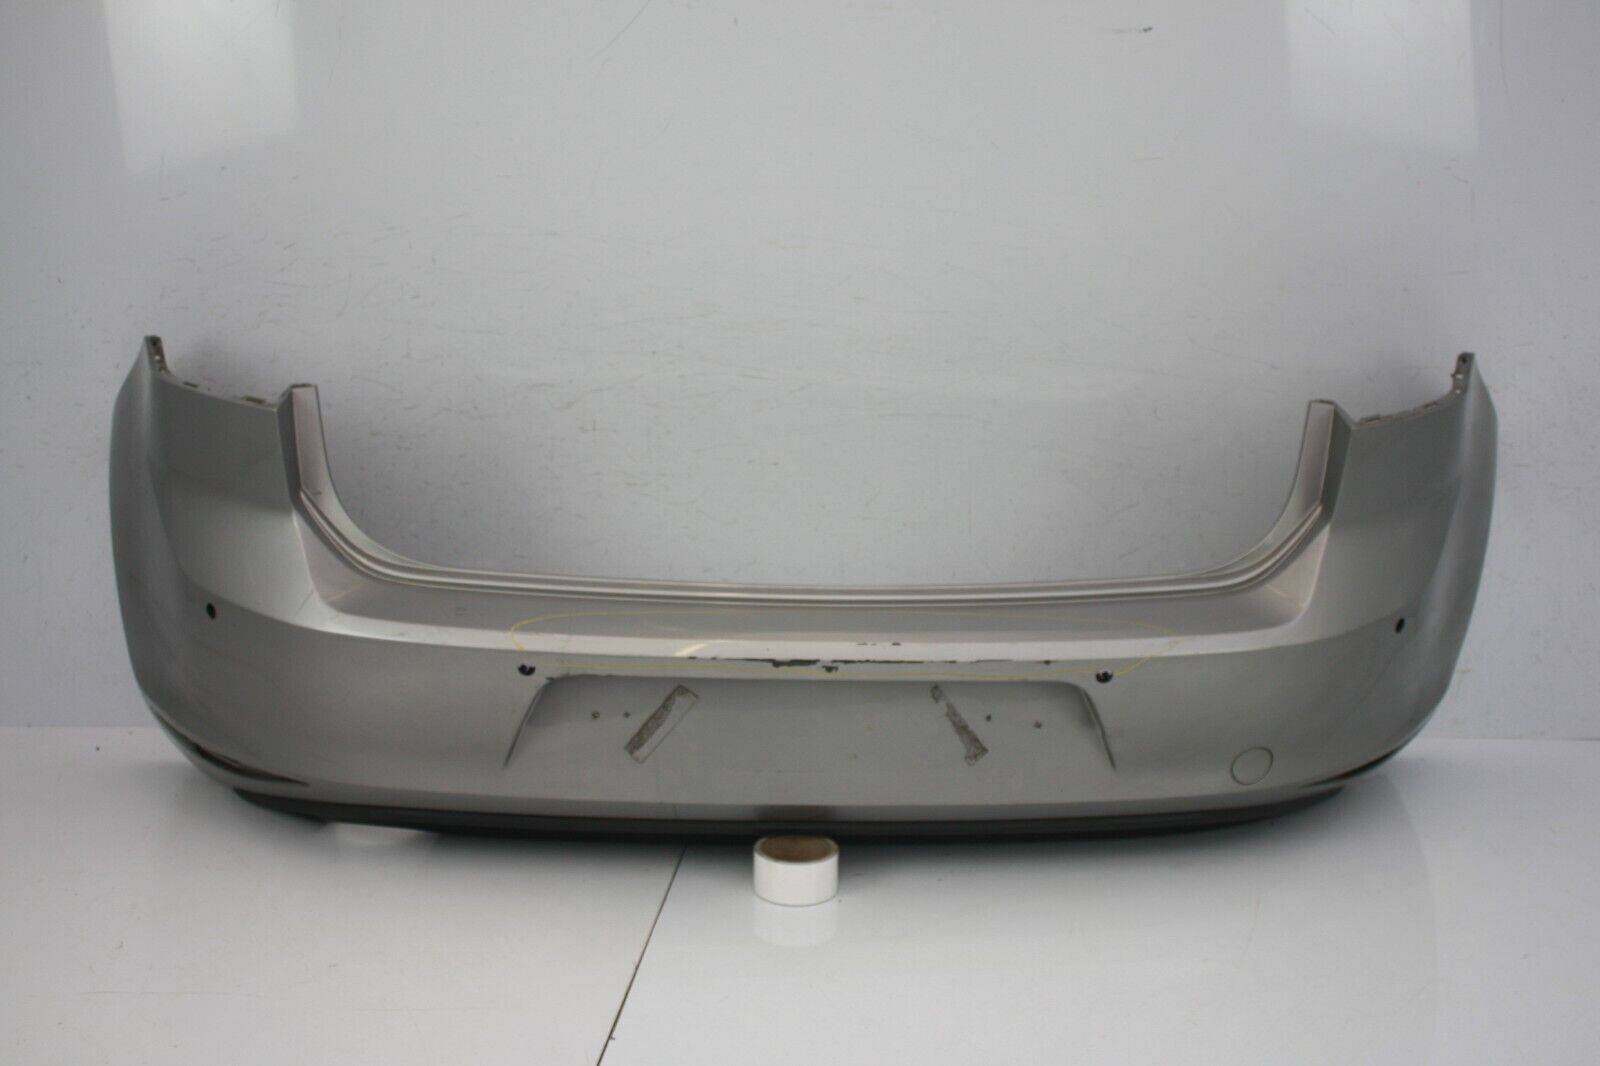 VW-Golf-Rear-Bumper-With-Diffuser-2013-TO-2017-5G6807421-Genuine-175900320702